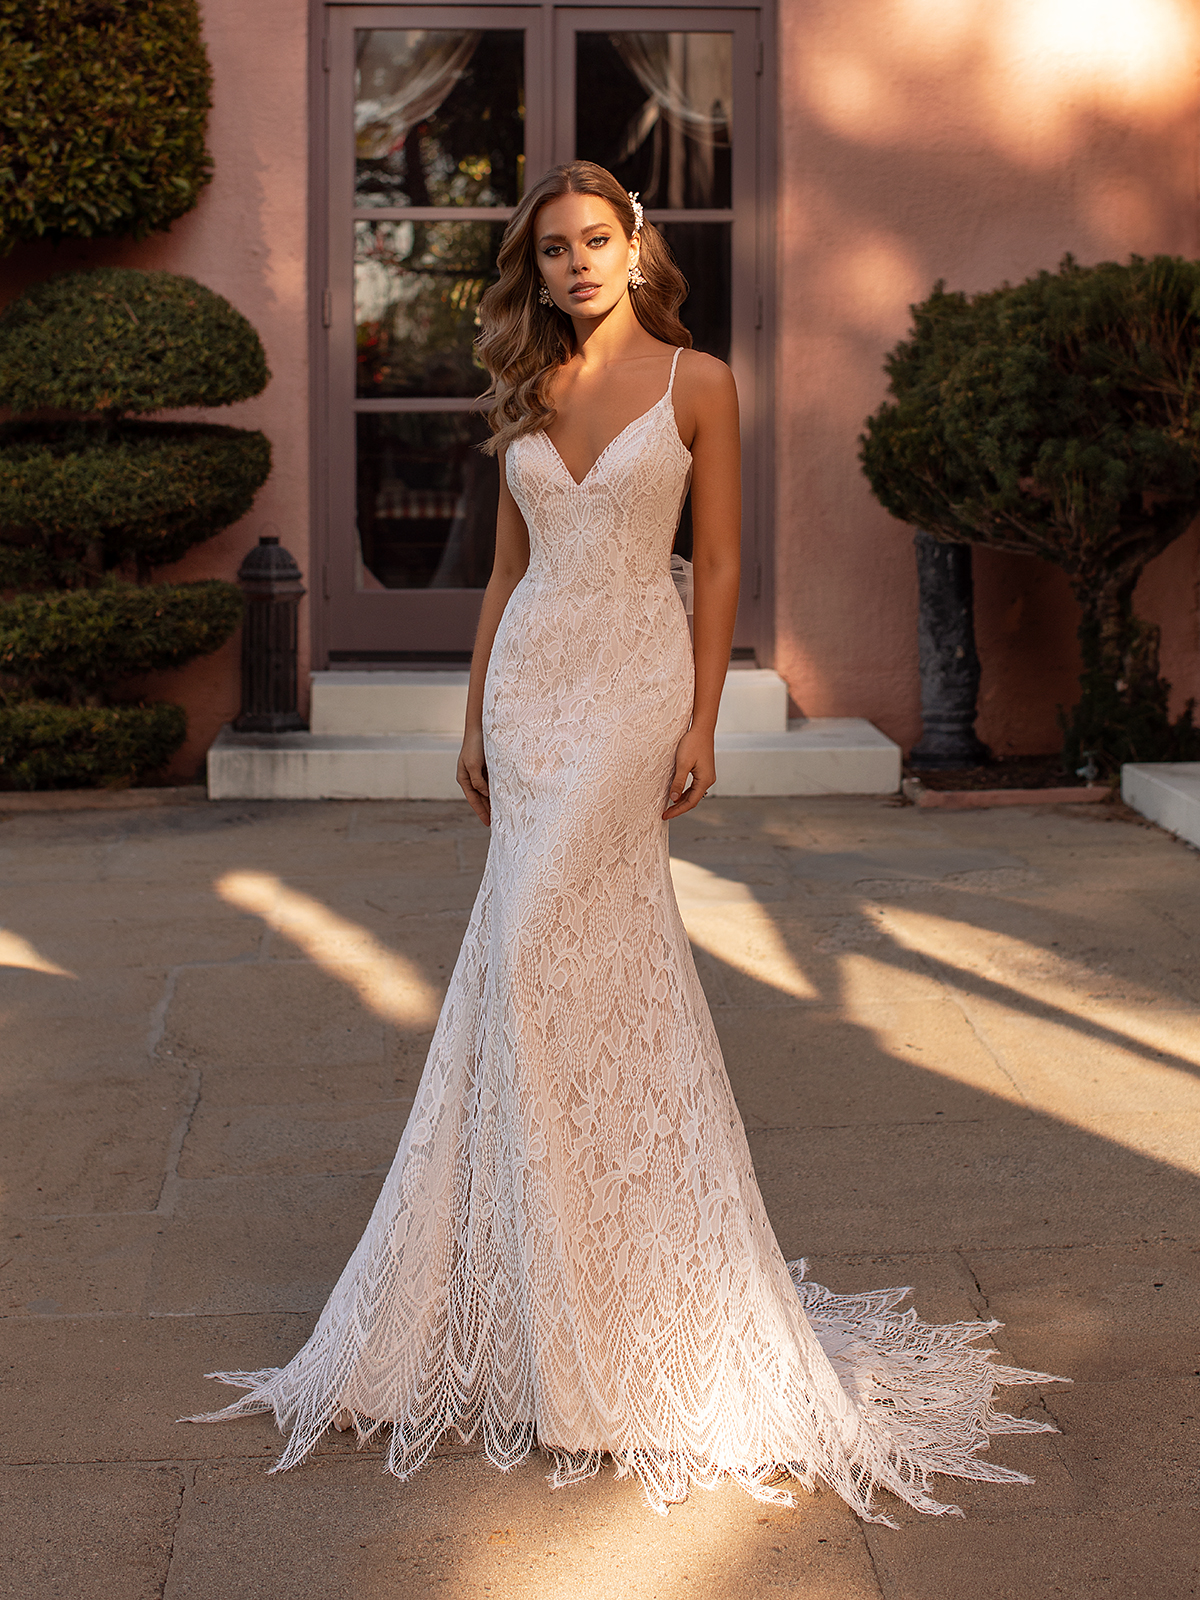 Lace Wedding Gowns for Fall, Winter, Spring & Summer